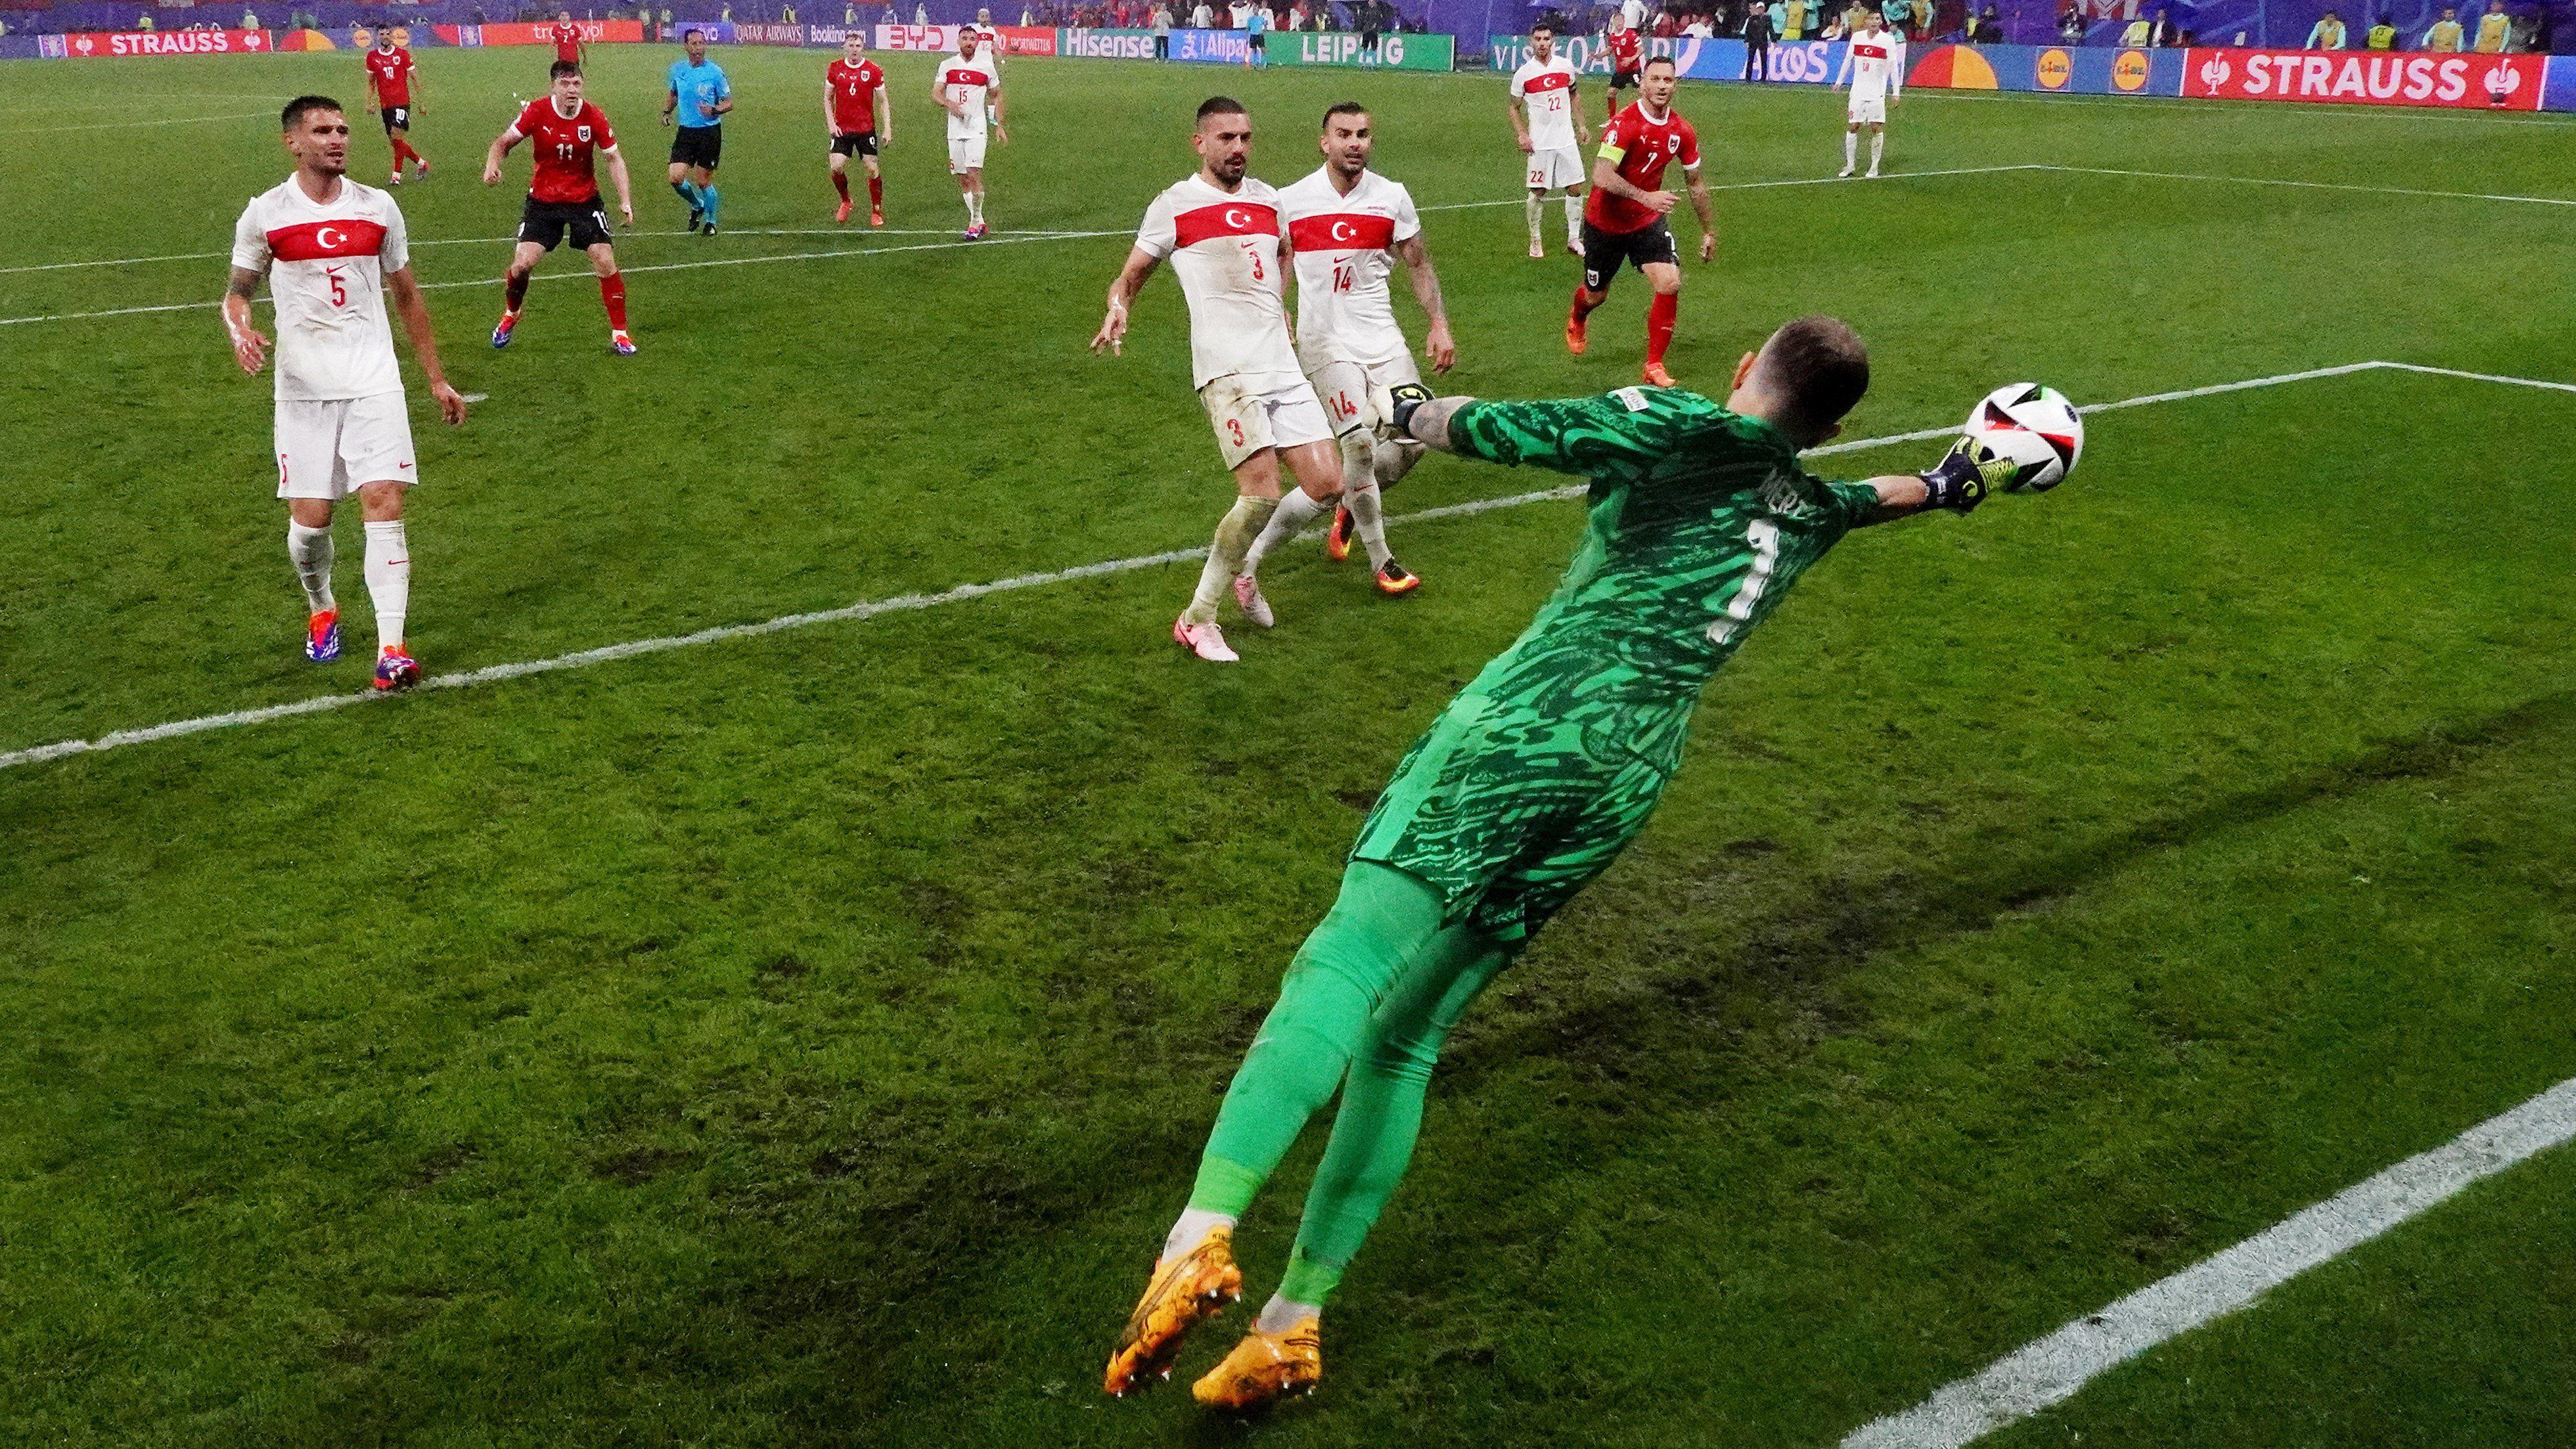 Banks replica - was this one of great saves in Euros history? 